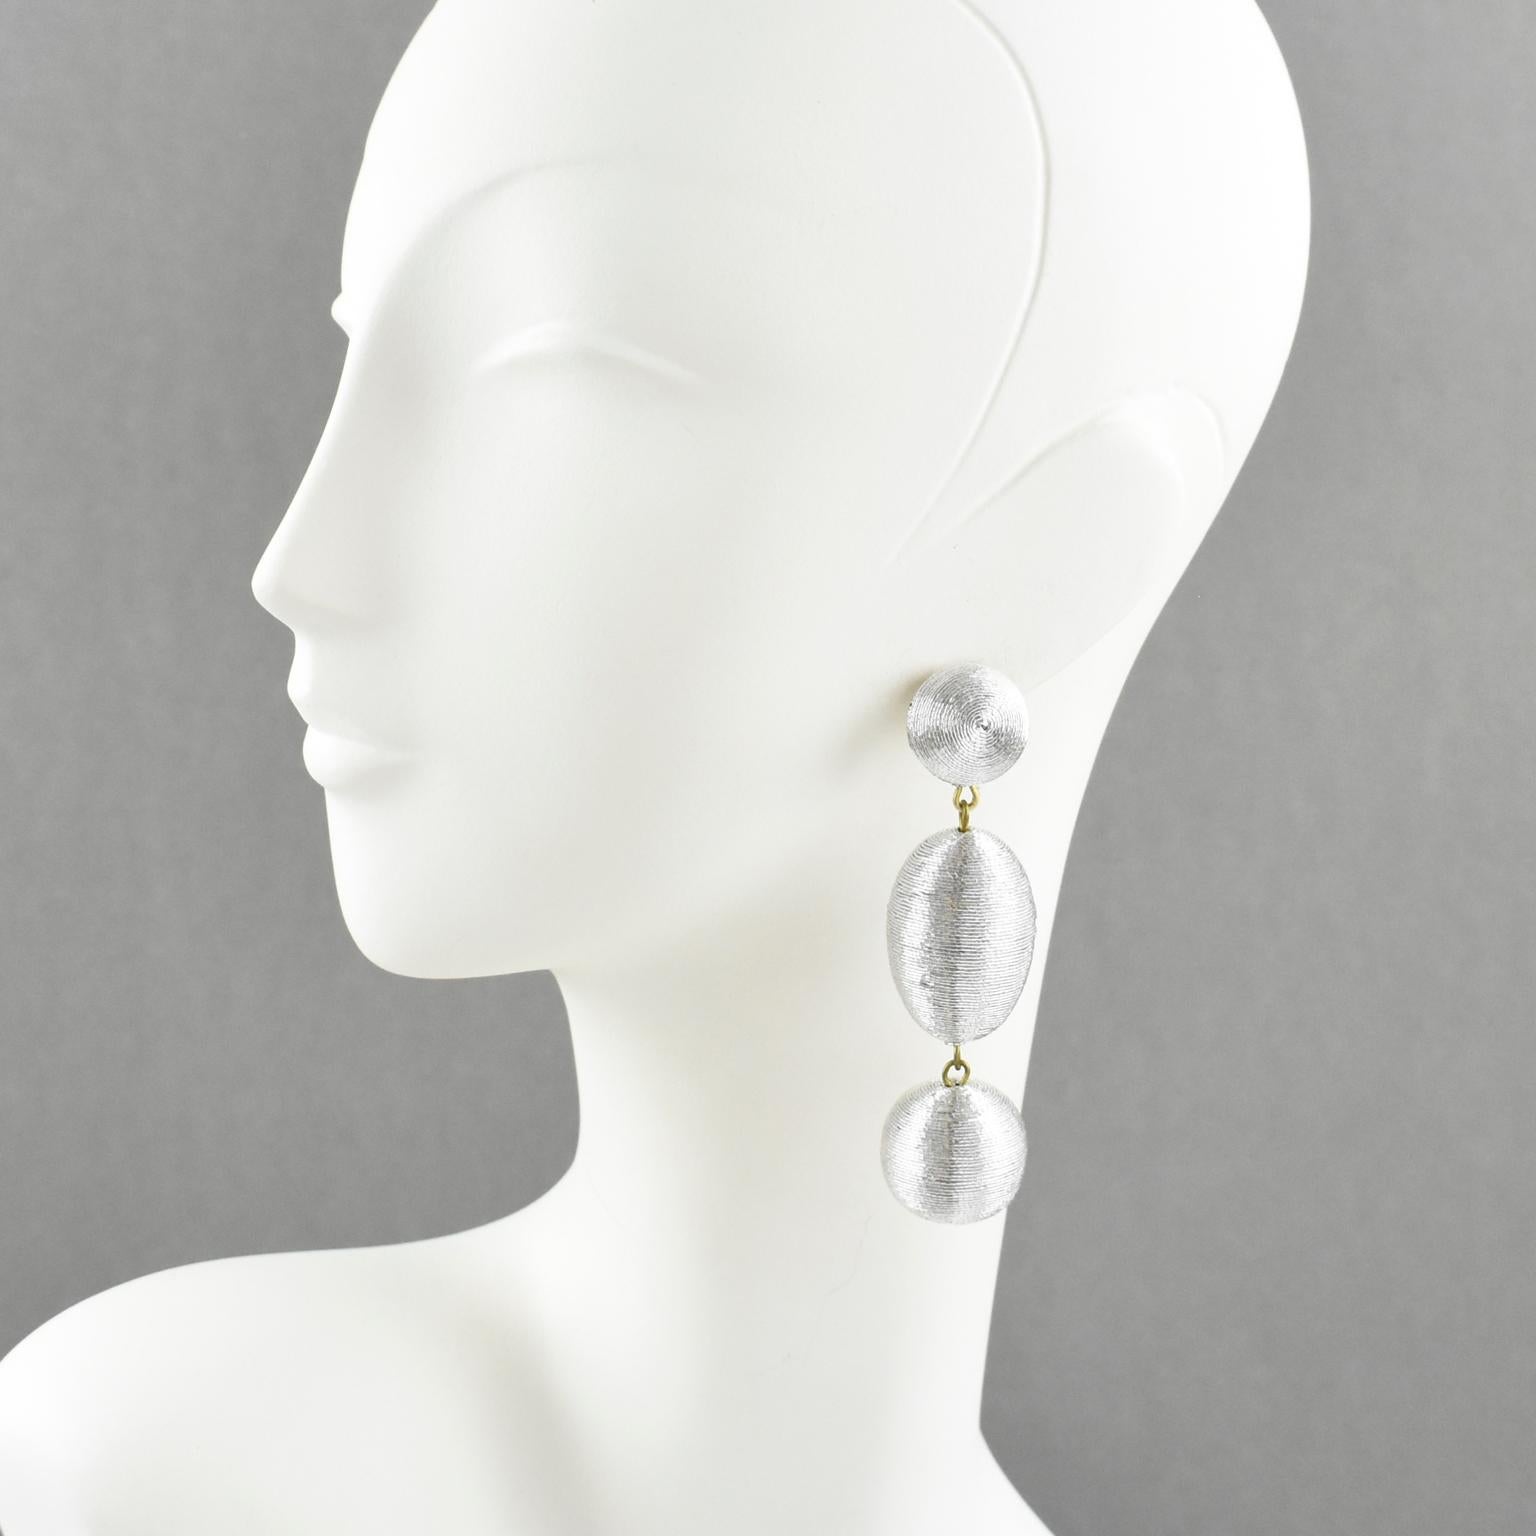 Disco perfection, these pierced earrings have a vintage look. They feature an oversized chandelier dangle shape with a ball and olive elements, all wrapped with silver metallic thread. There is no visible maker's mark. They are for pierced